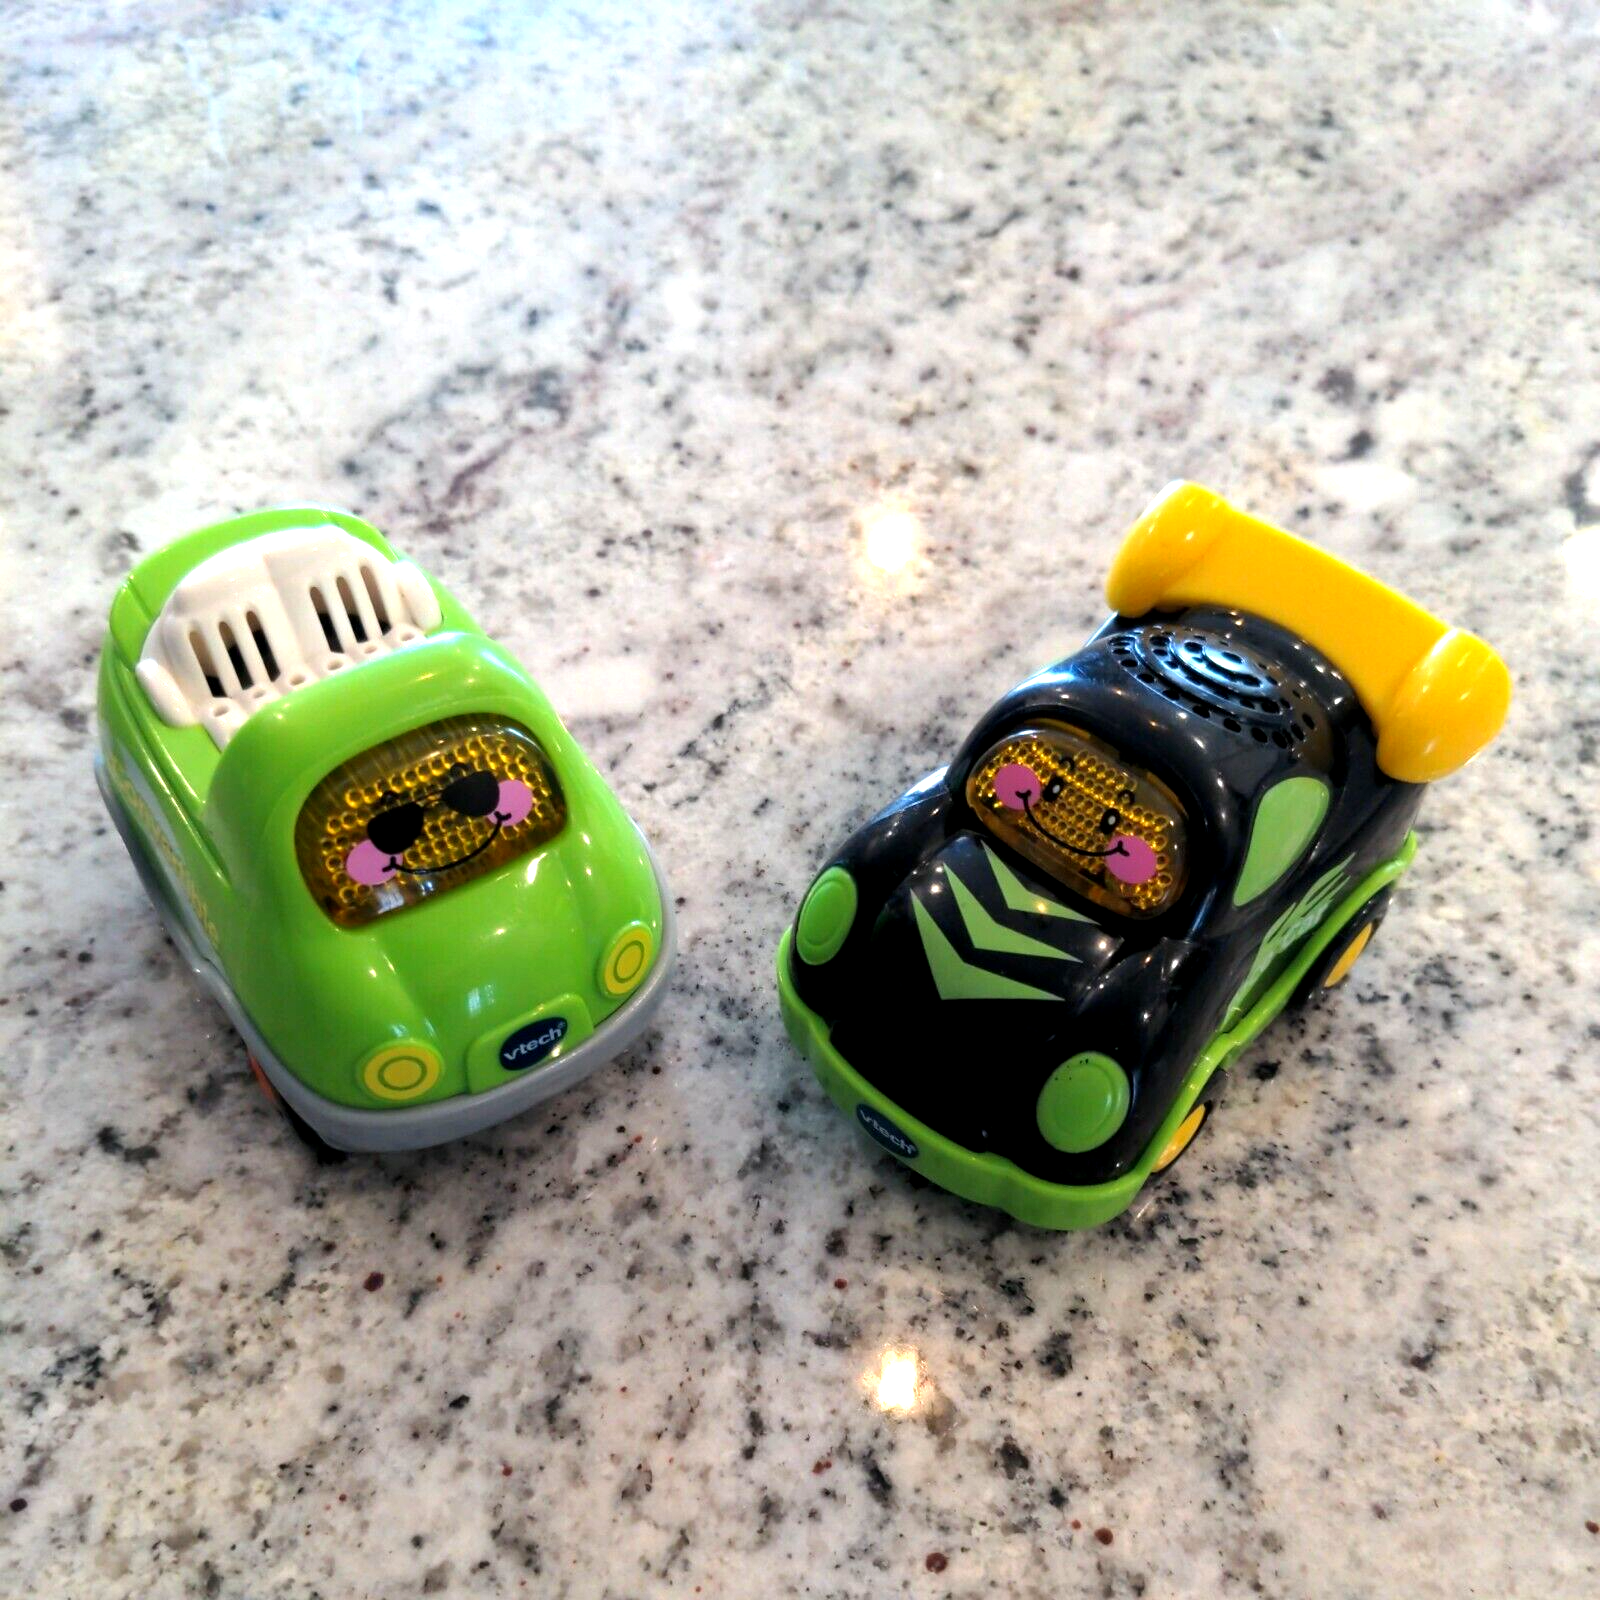 Vtech Go Go Smart Wheels Green Convertible and Race Car Lights and Sounds  - $6.13